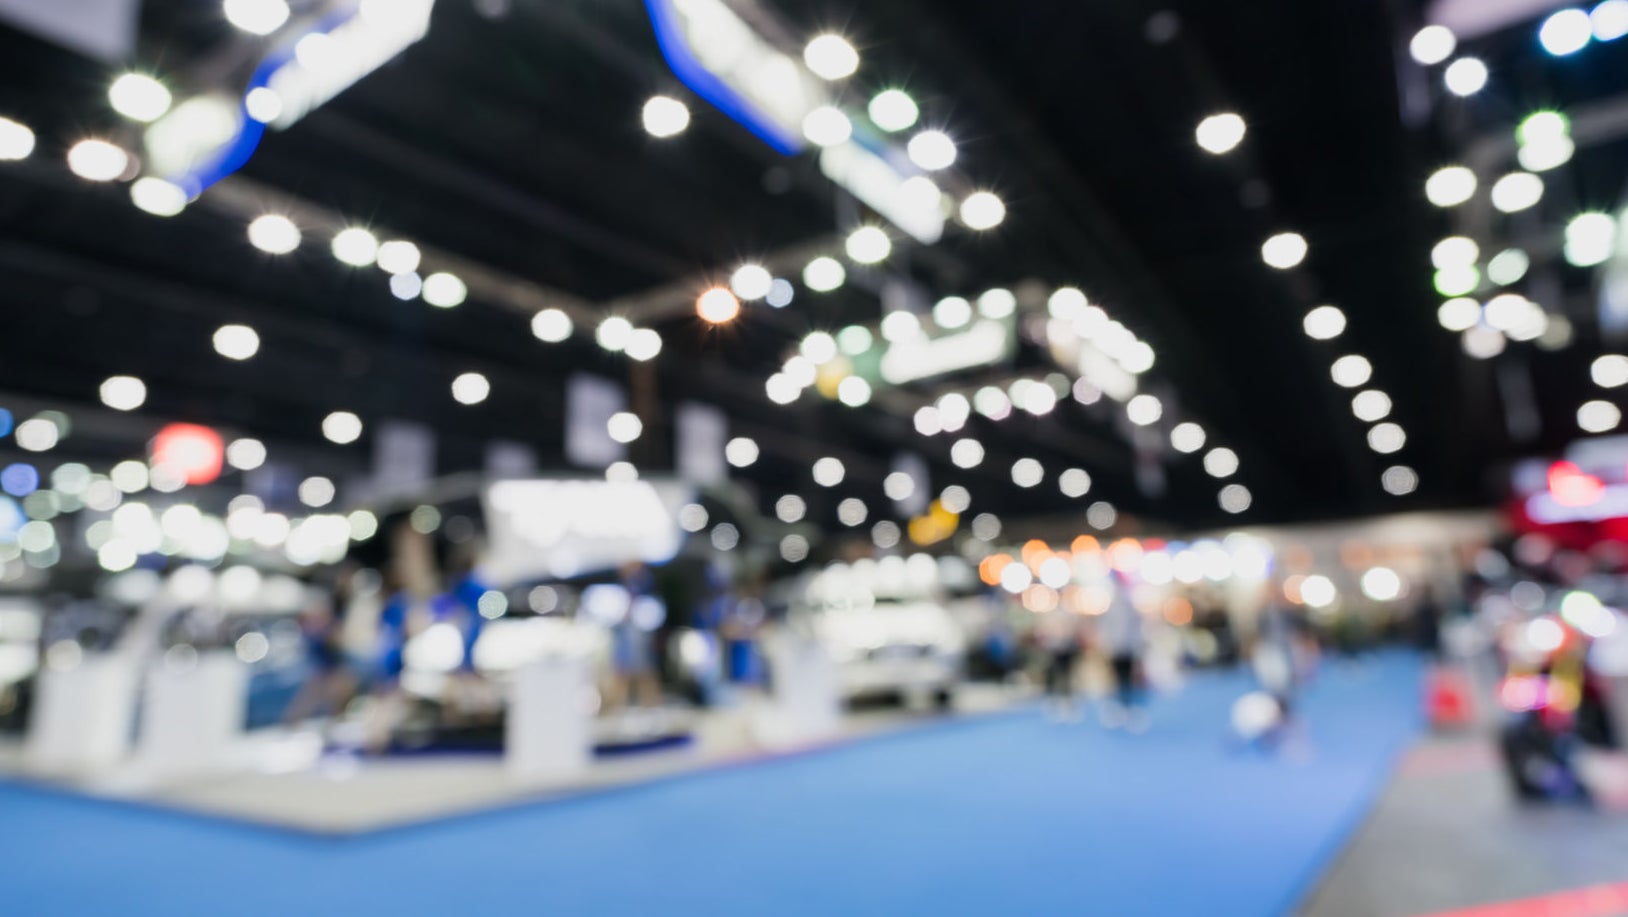 Blurred, defocused background of public event exhibition hall showing cars and automobiles, business commercial event concept